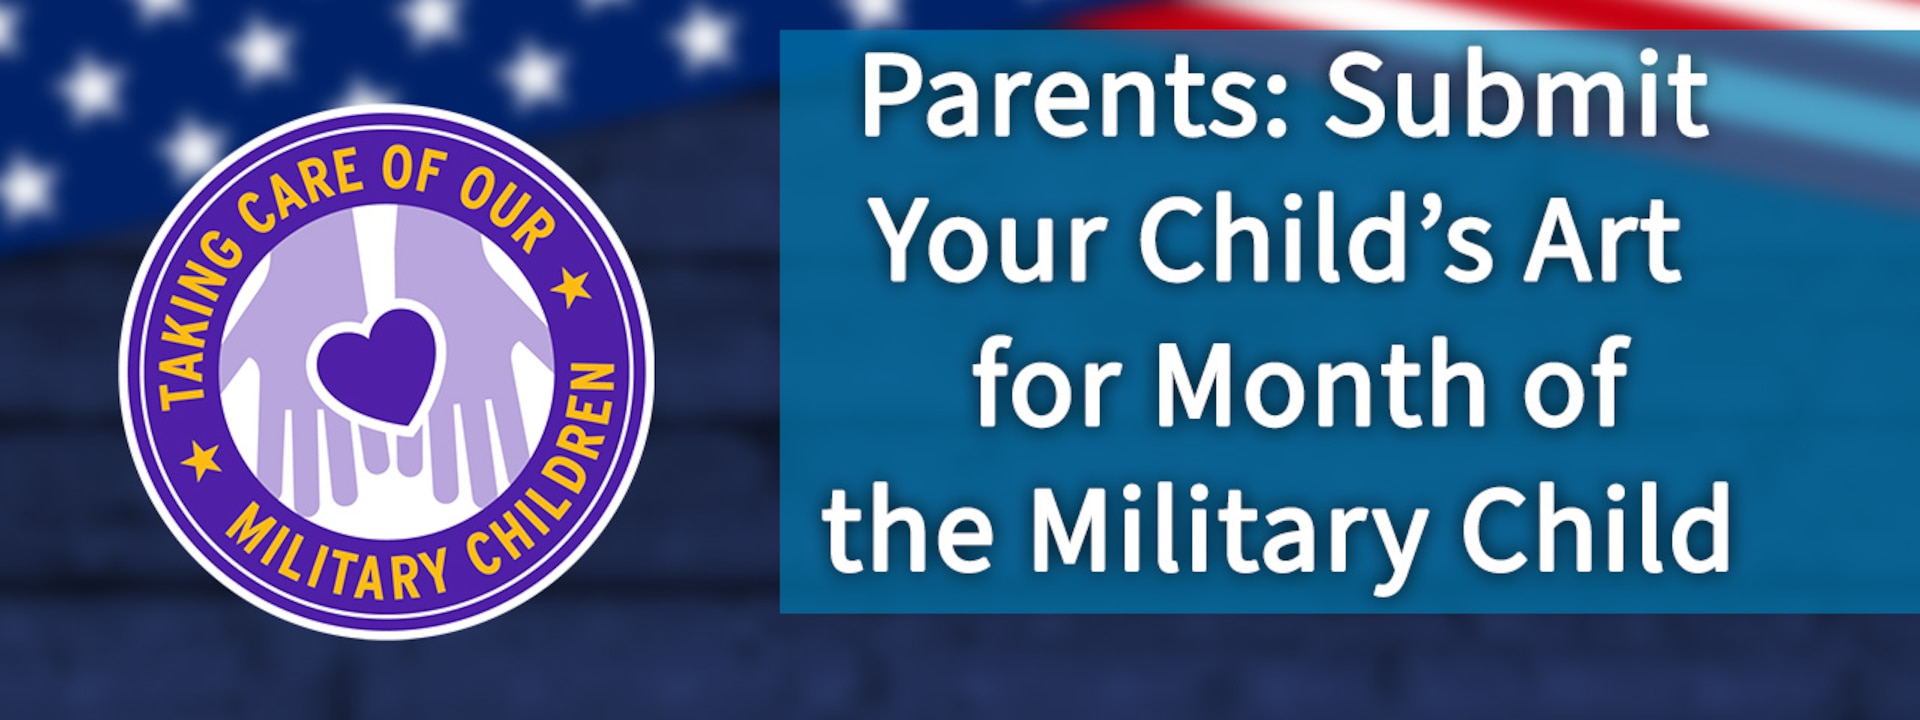 Artwork promoting a solicitation for parents to submit their child's art for month of the military child.